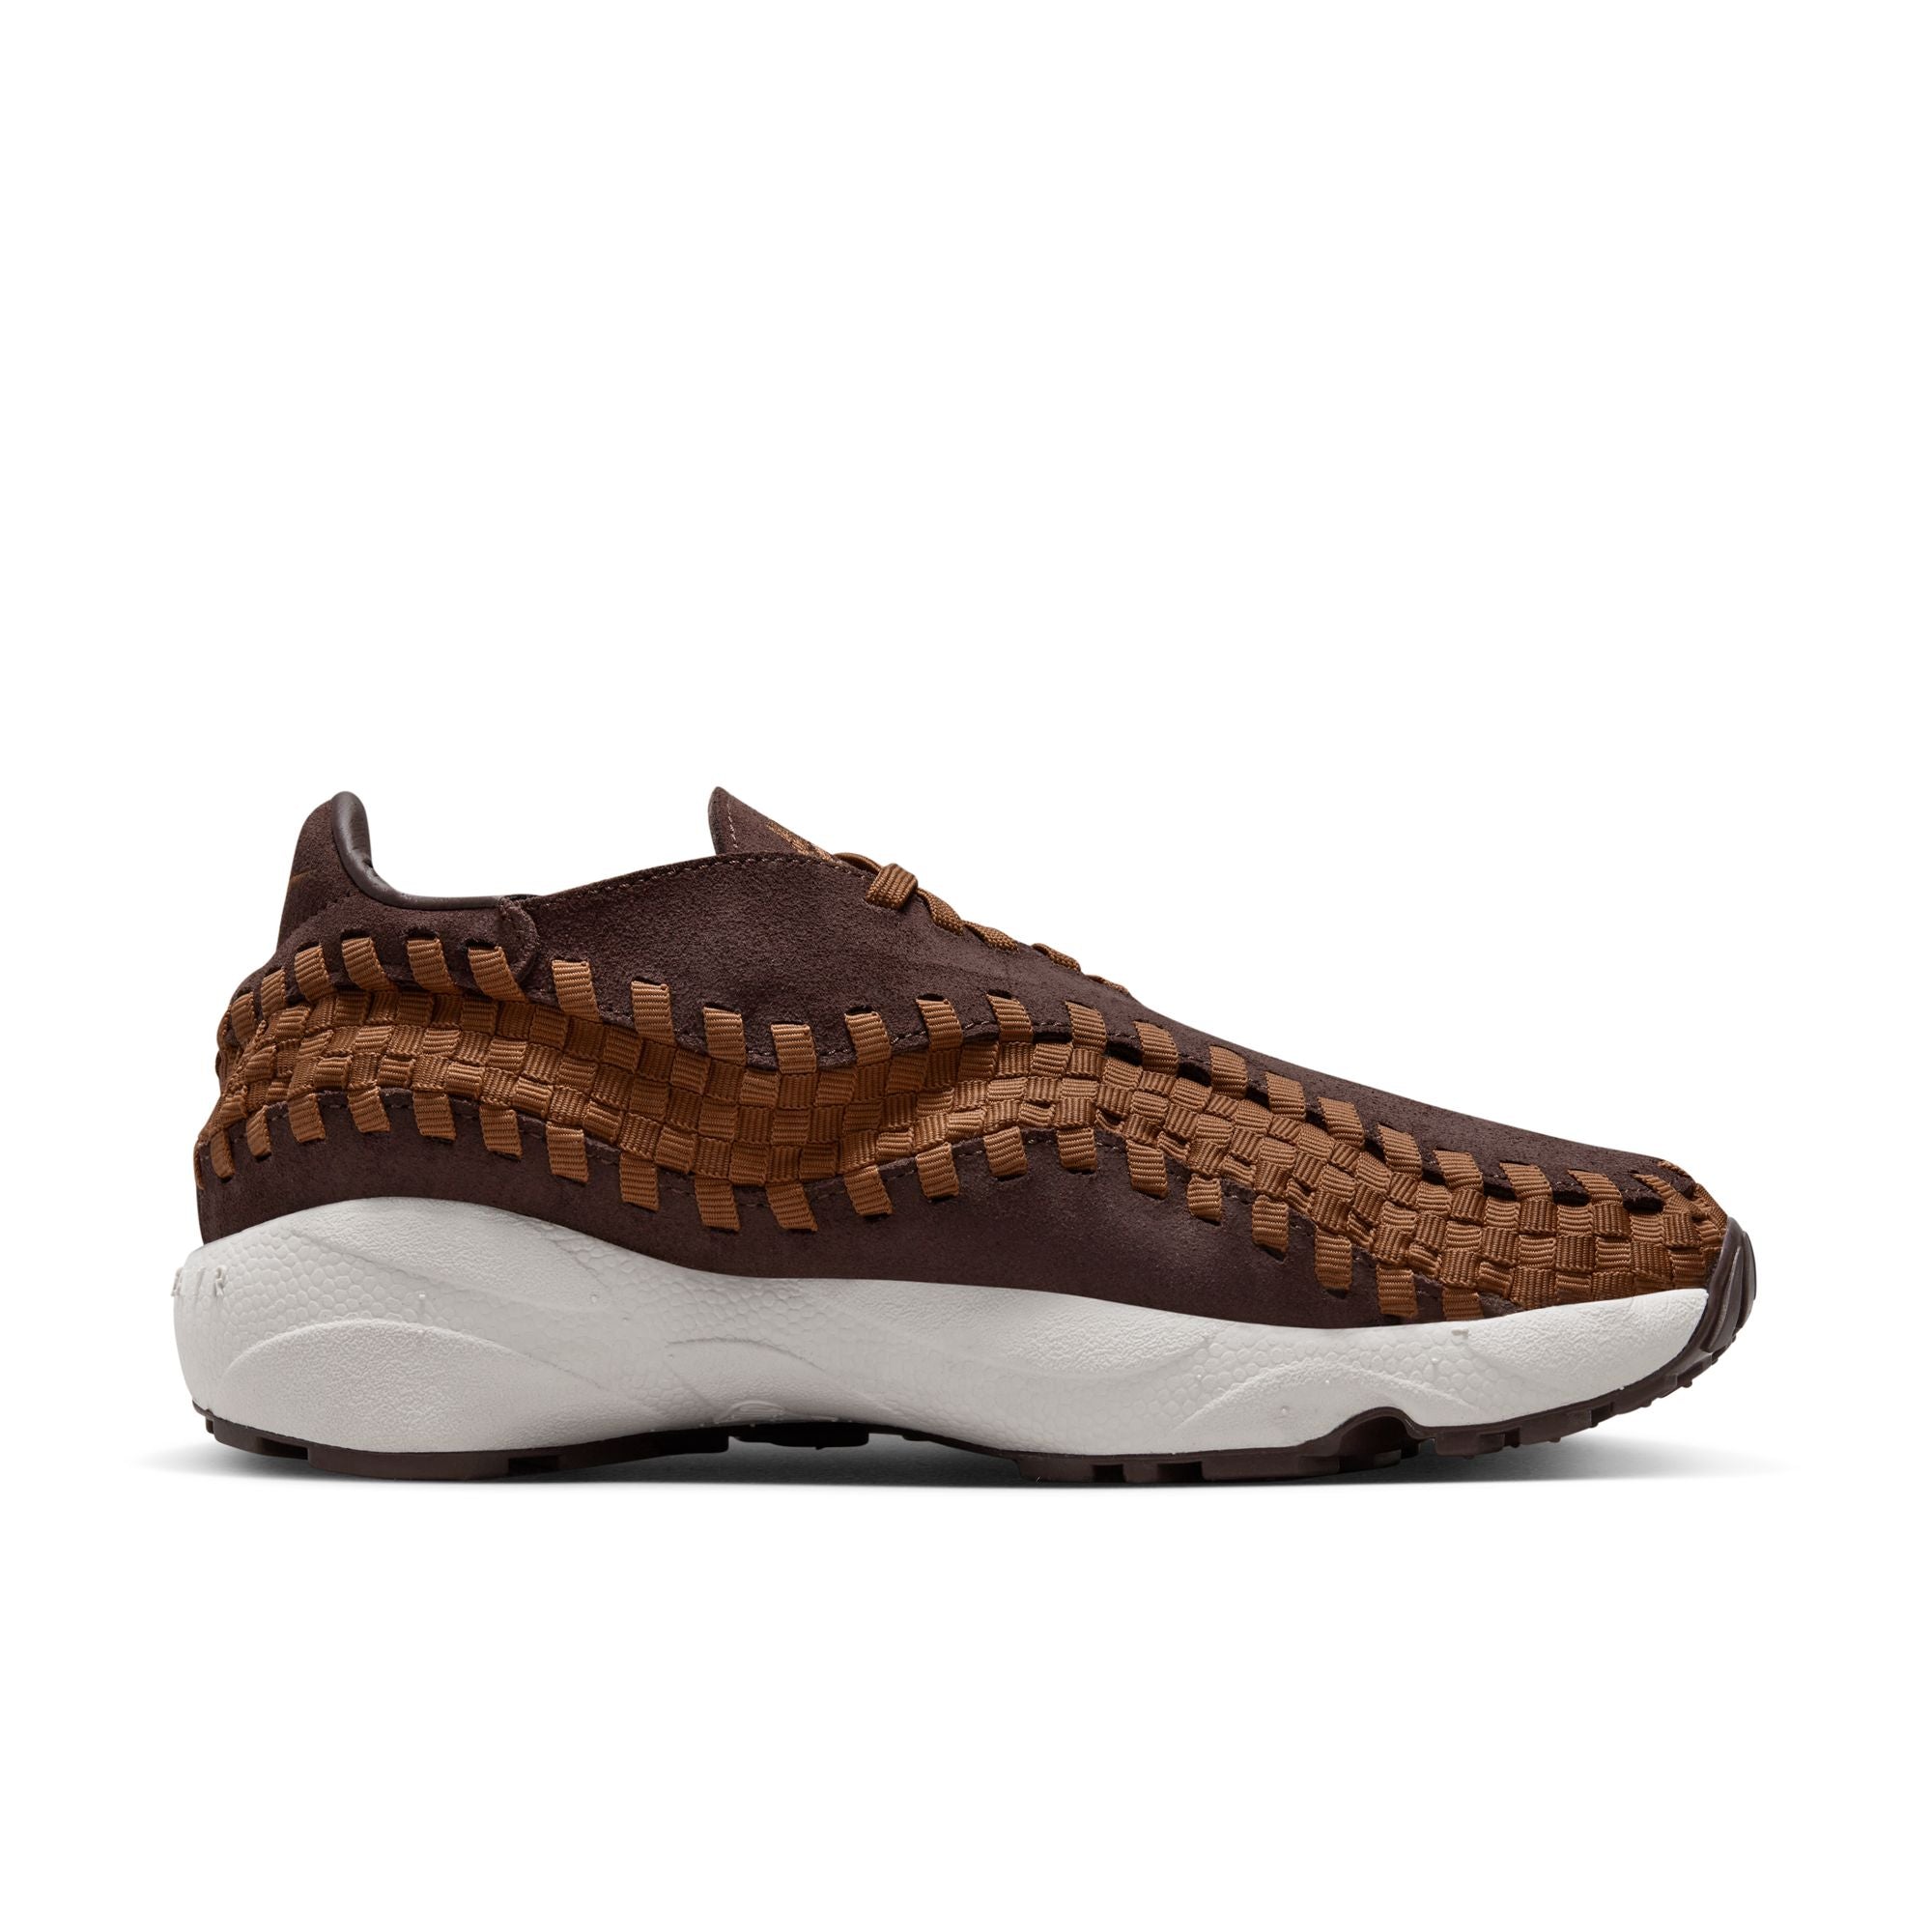 Air Footscape Woven 'Saturn Gold and Earth' W - INVINCIBLE